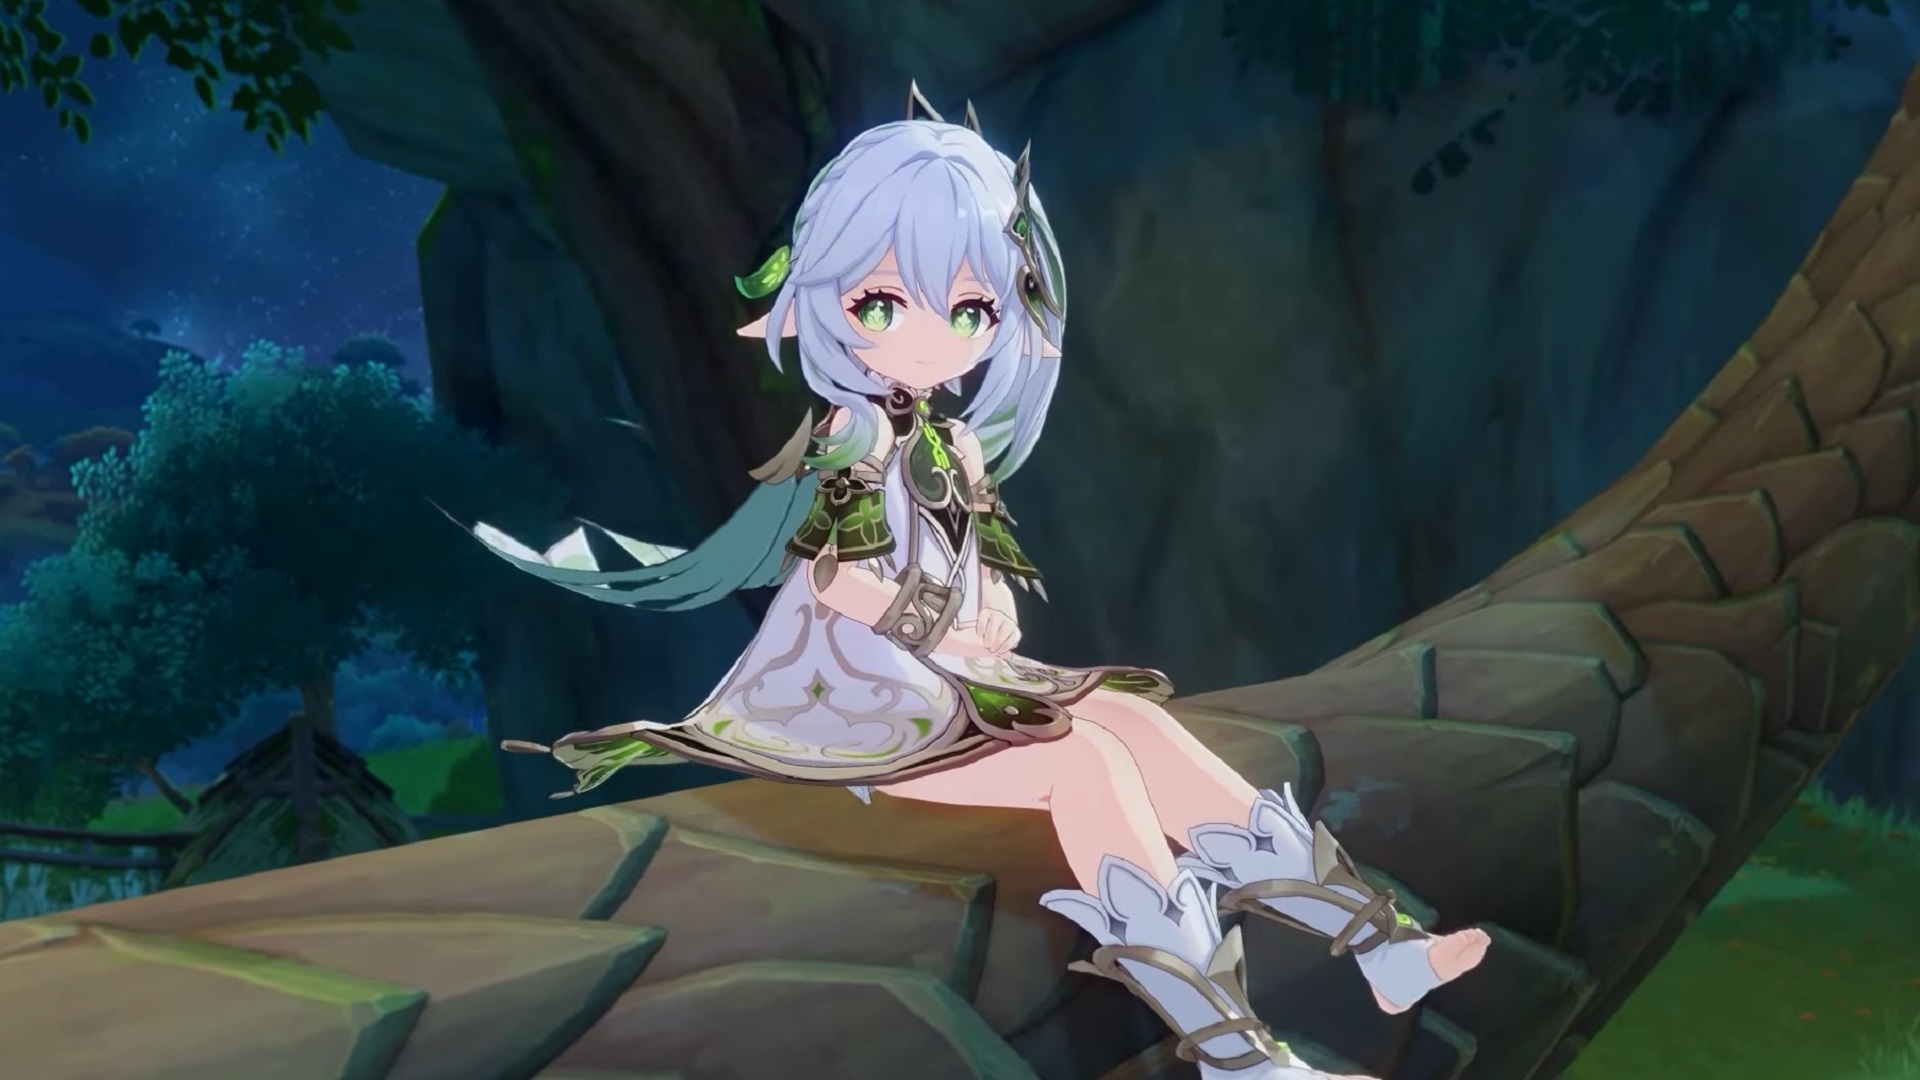 Upcoming Genshin Impact character Nahida sits in a tree with a shy look